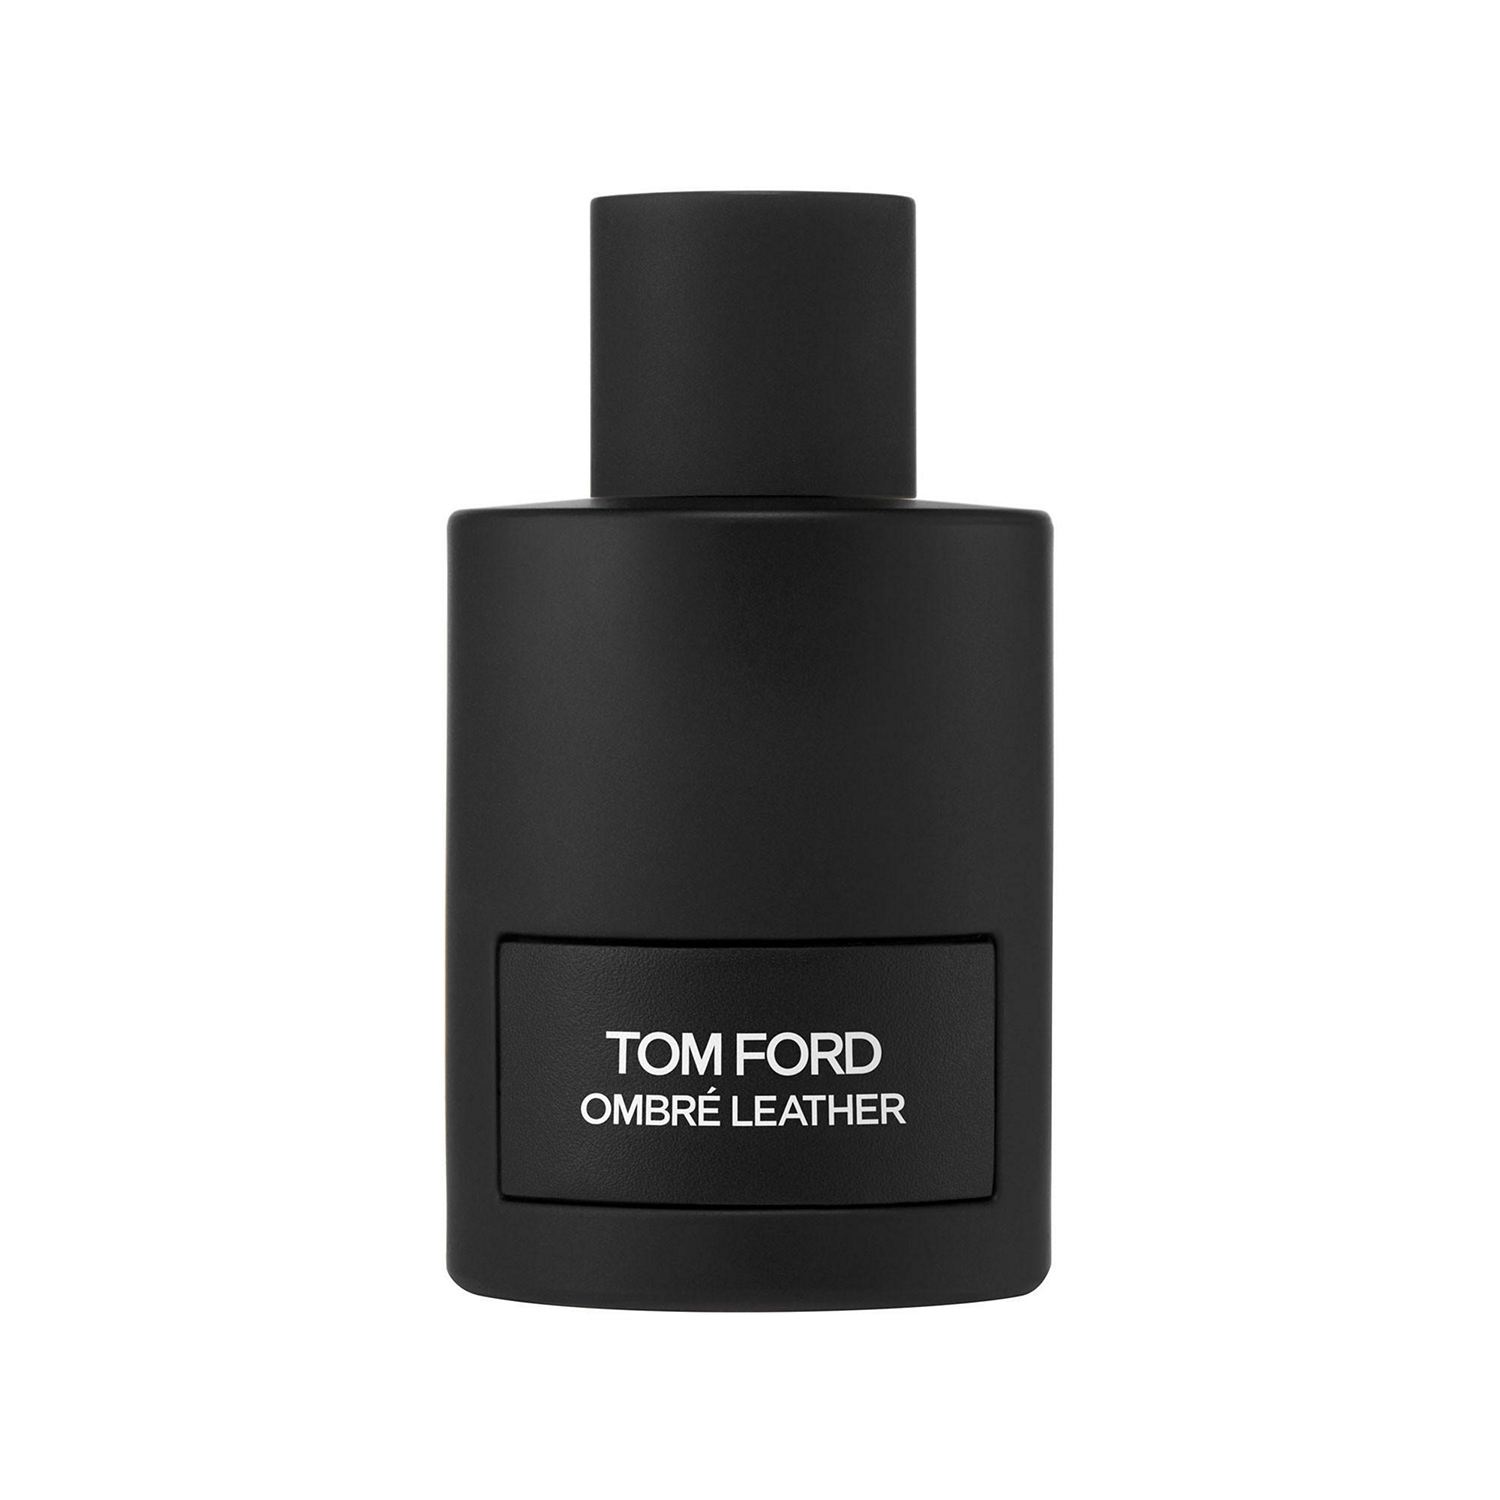 Tom Ford – Ombre Leather EDP 50ml